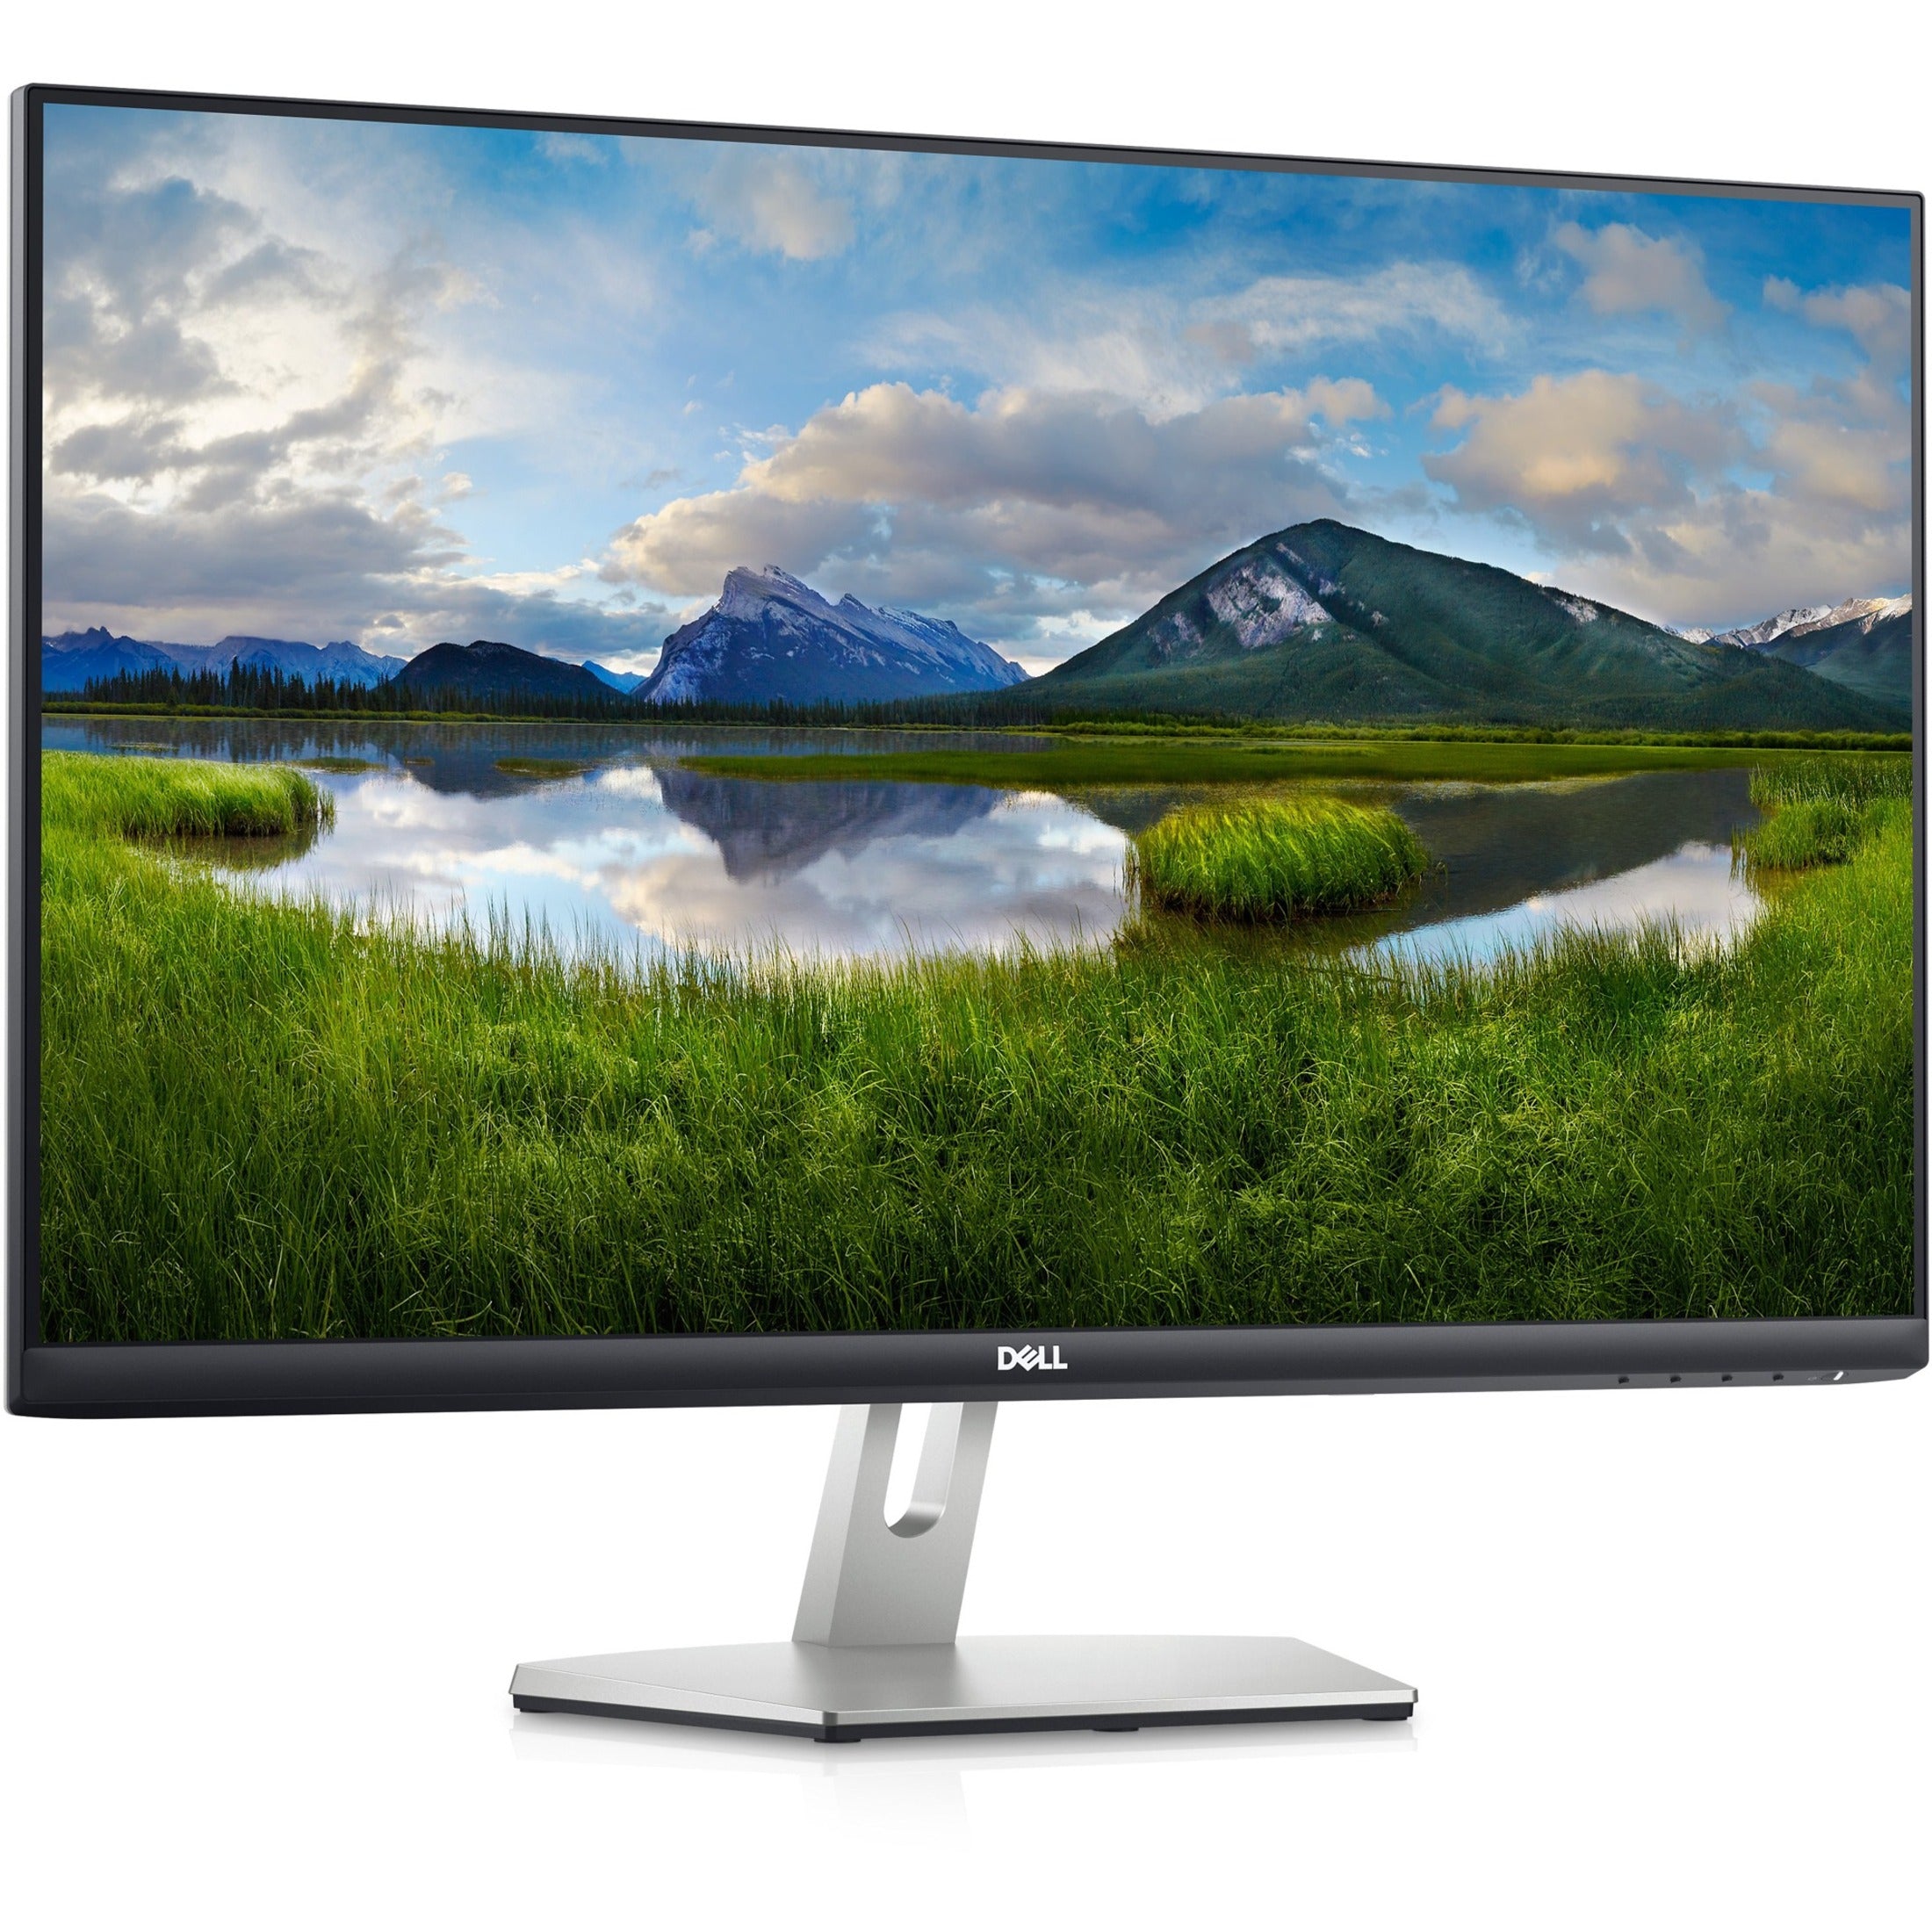 Dell S2721HN 27 Full HD LCD Monitor, Stunning Visuals and Immersive Viewing Experience